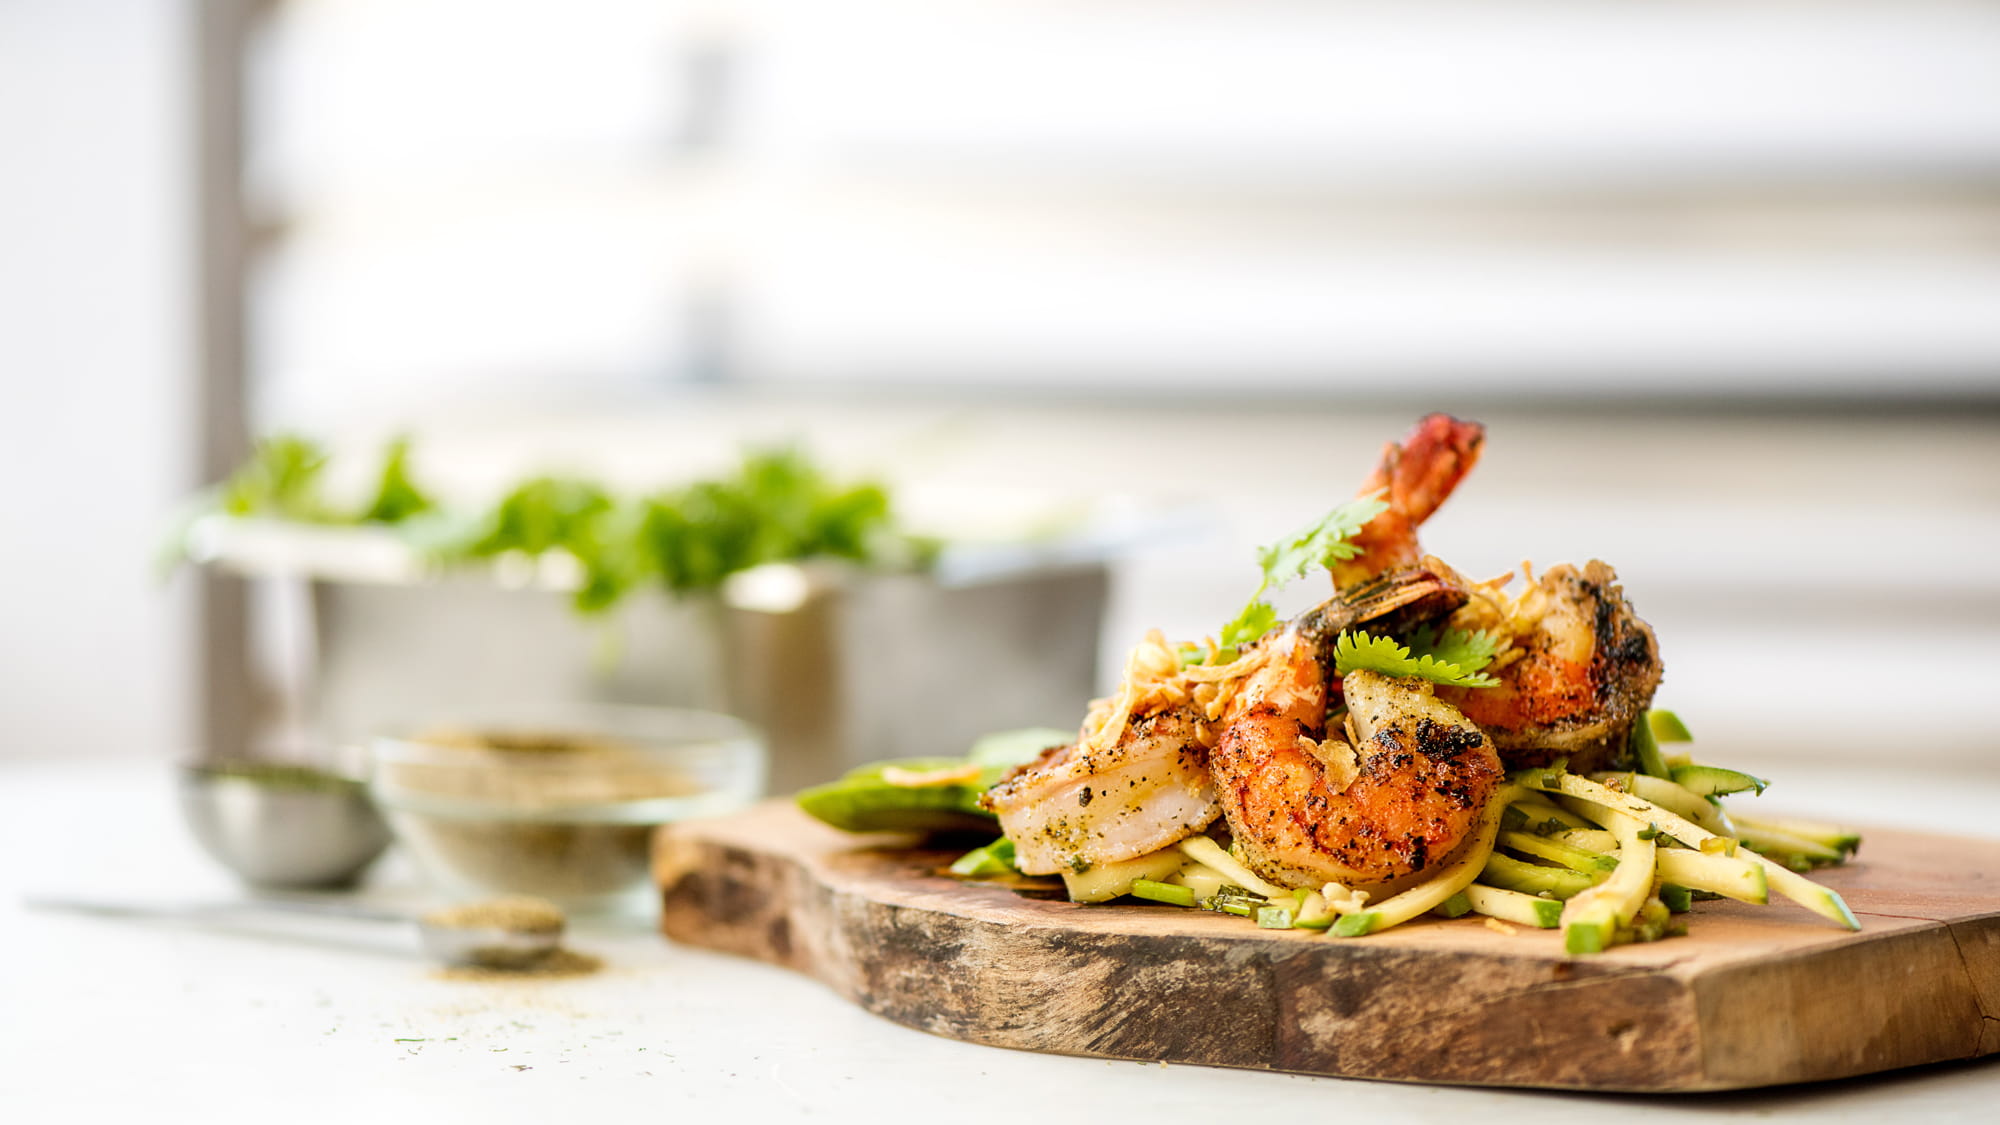 Grilled Black Pepper Shrimp with Green Mango and Avocado Slaw